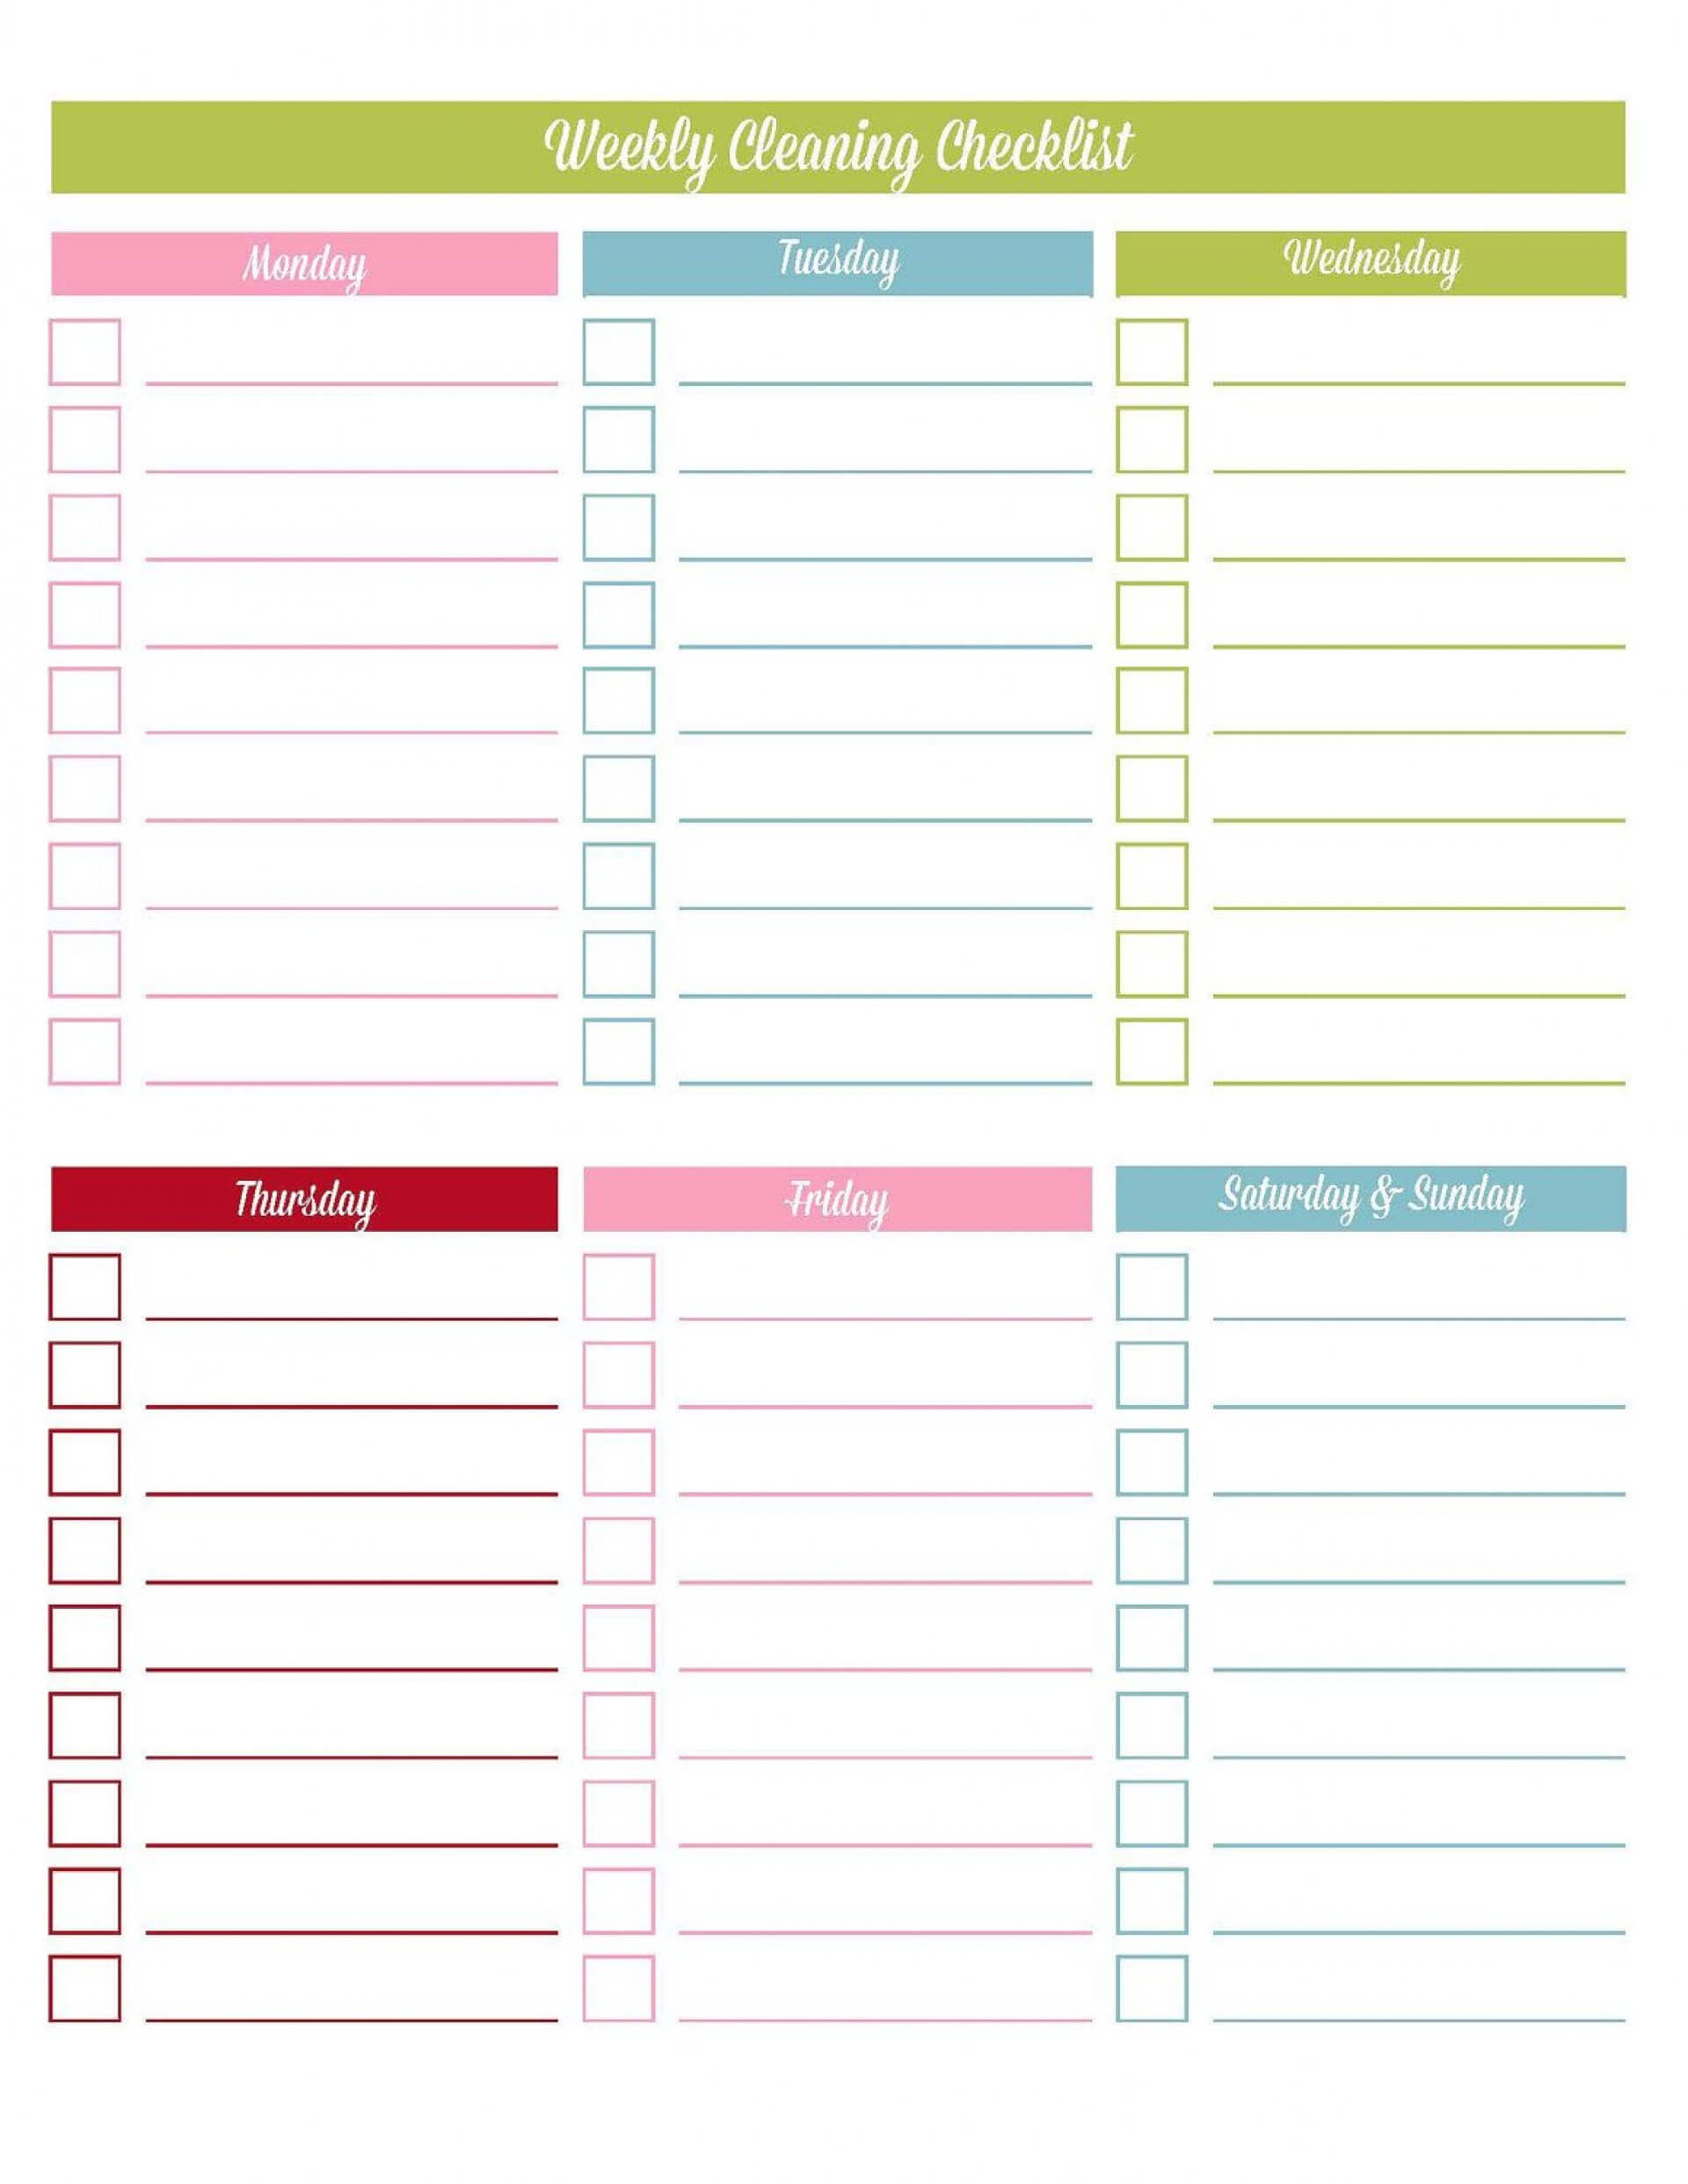 005 Weekly Cleaning Schedule Template Checklists Fascinating Throughout Blank Cleaning Schedule Template